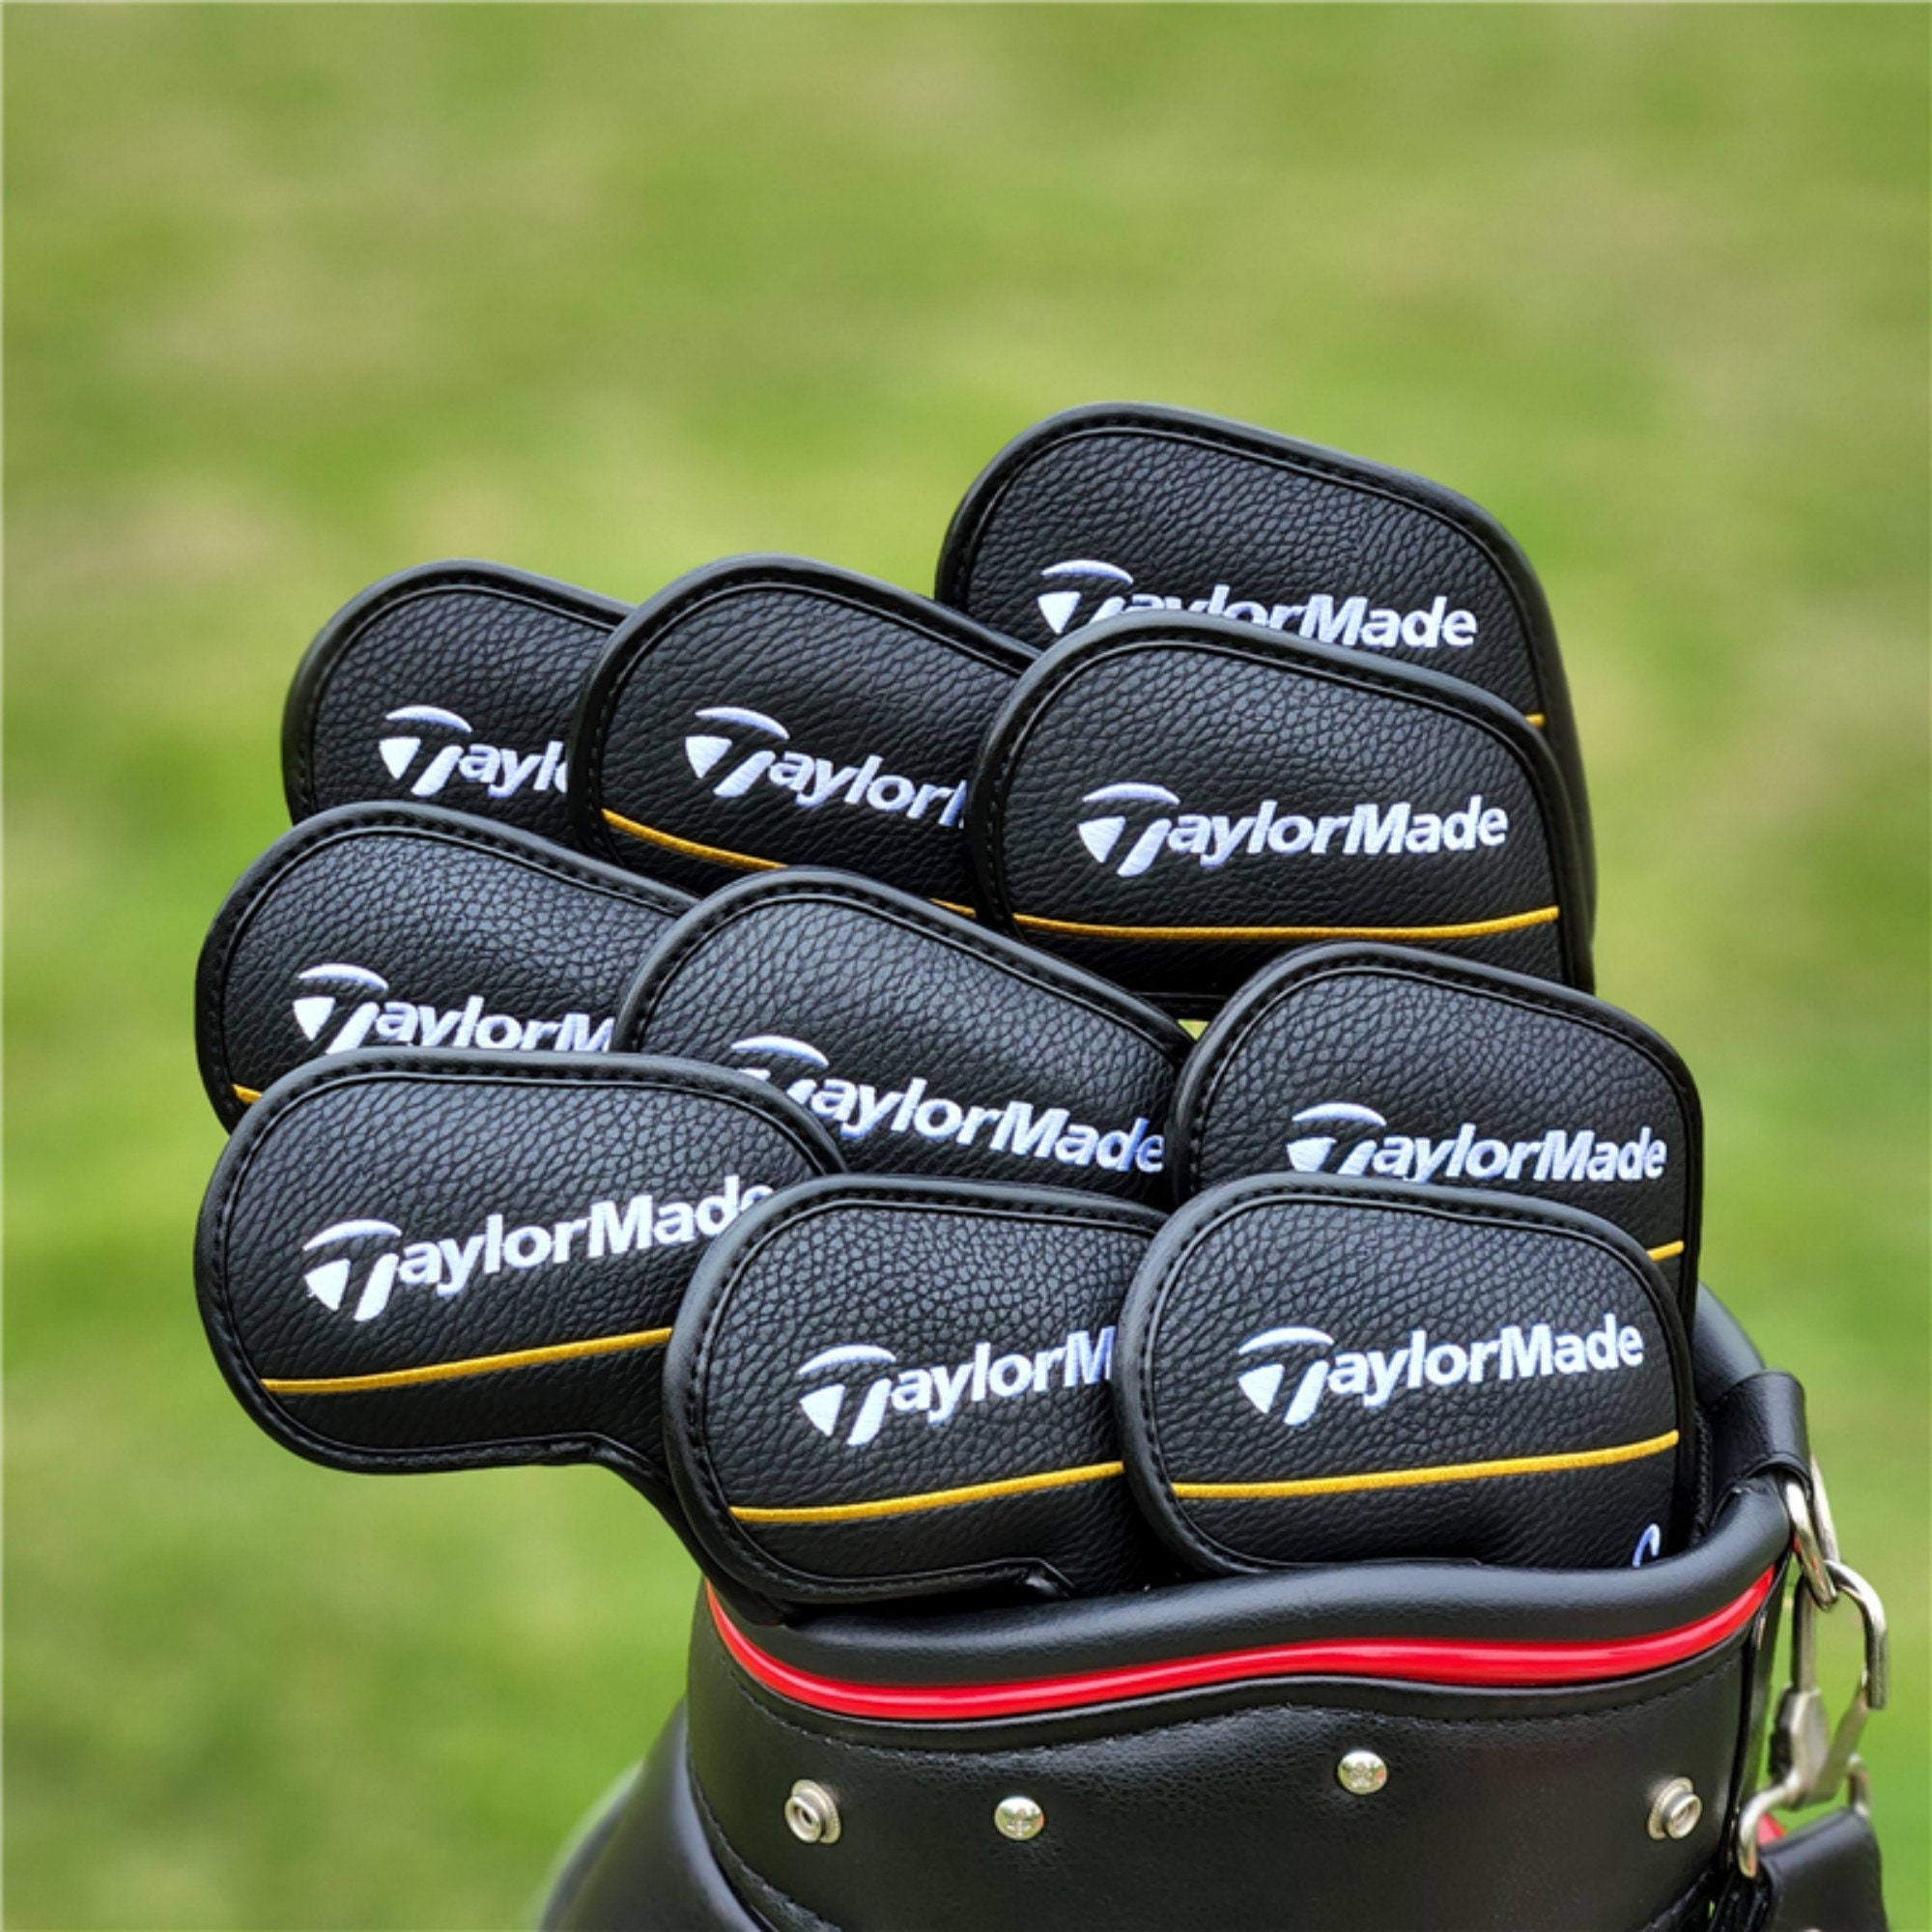 Iron Head Covers - Shop Online